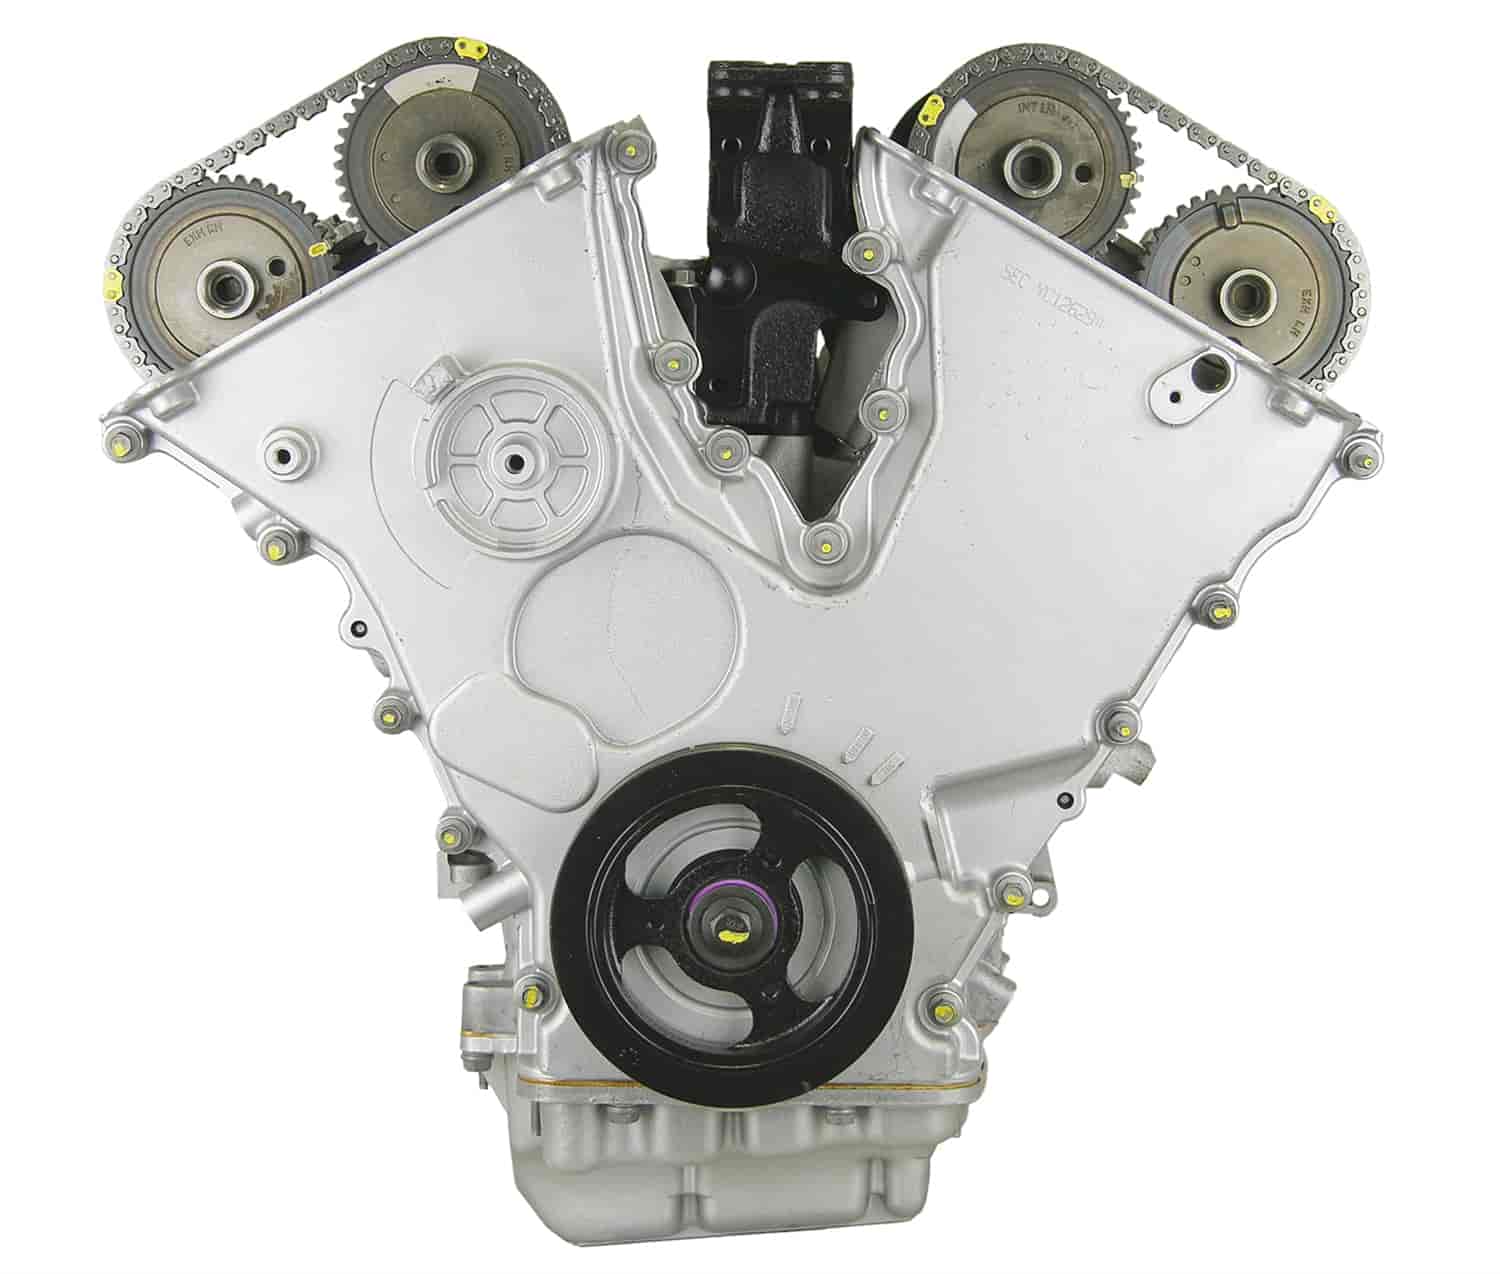 Remanufactured Crate Engine for 1999-2000 Ford Contour & Mercury Mystique/Cougar with 2.5L V6